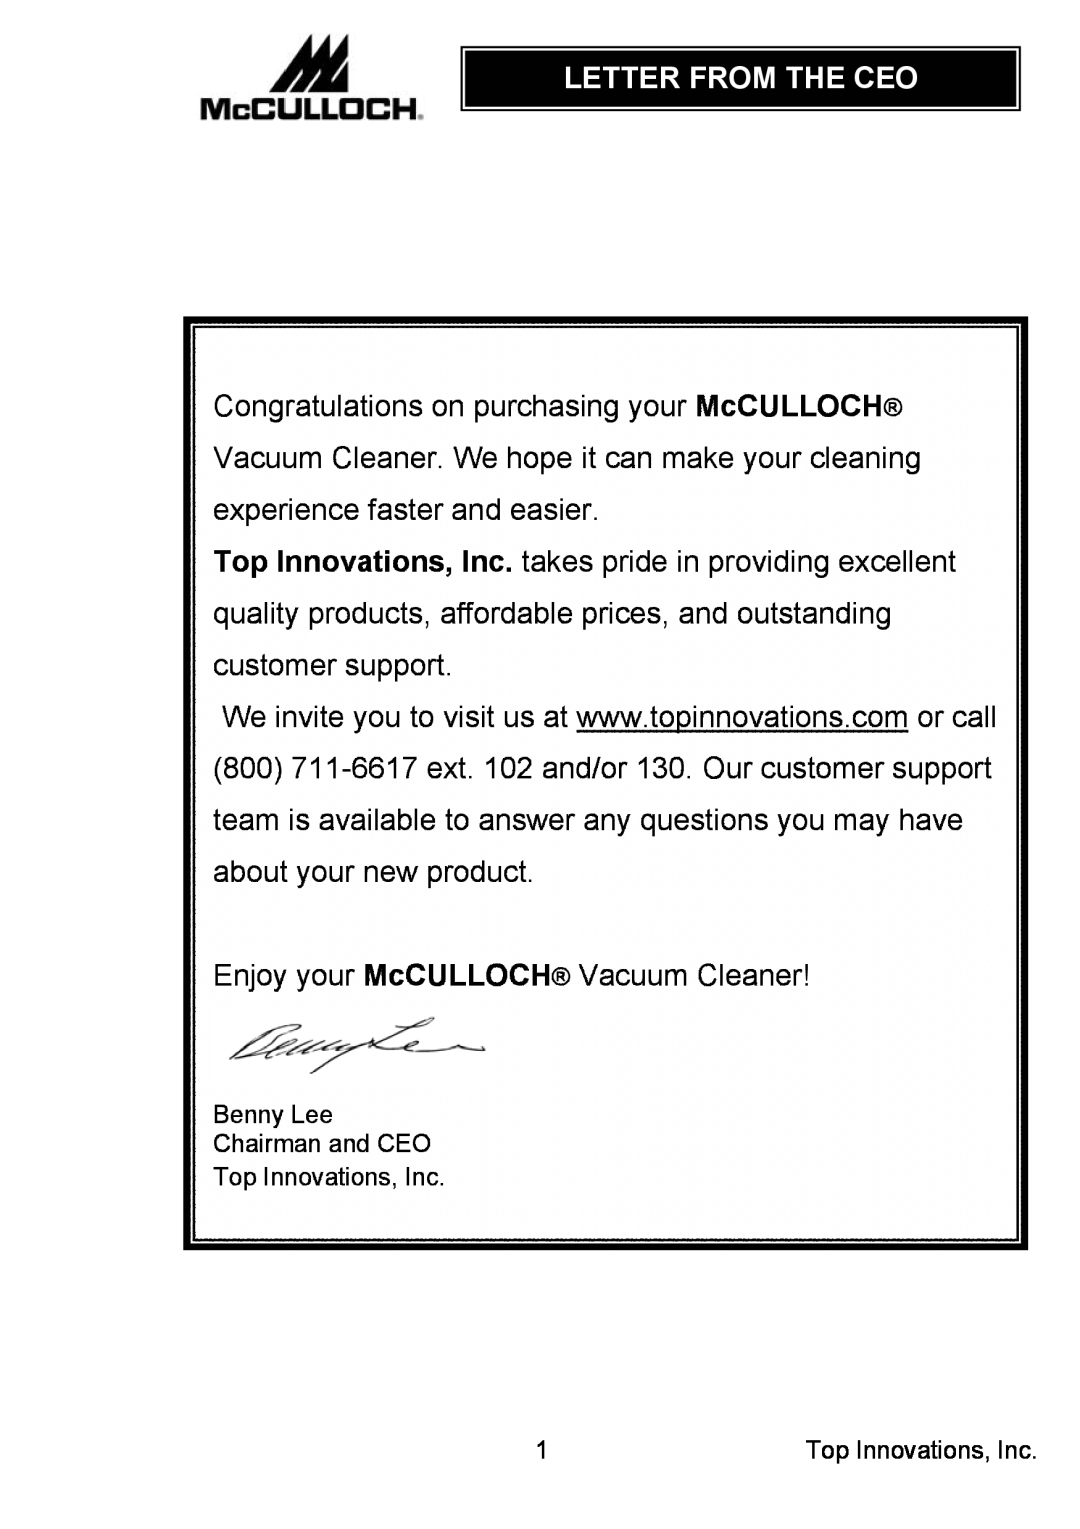 Top Innovations MC1910 warranty Letter From The Ceo 